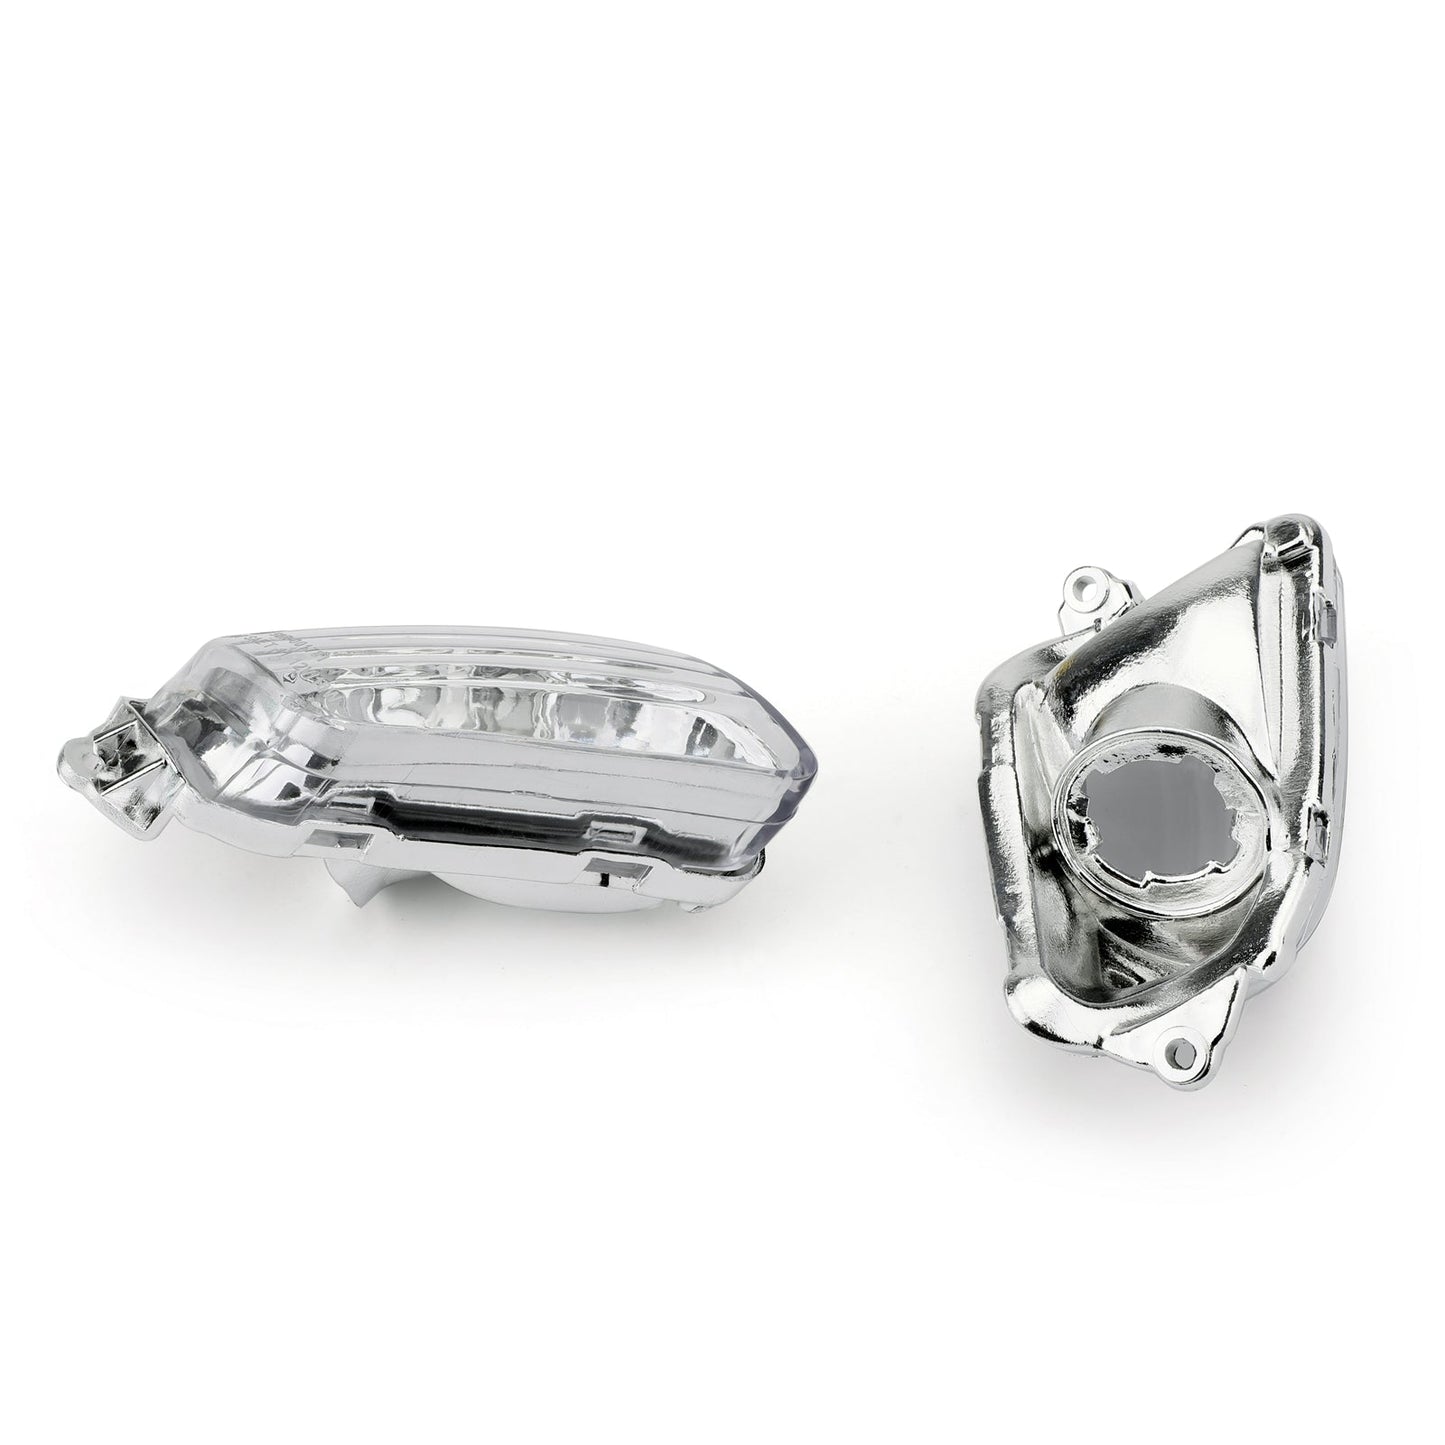 Front Turn Signals Lens For Honda CBR1100XX 1999-2006 Clear